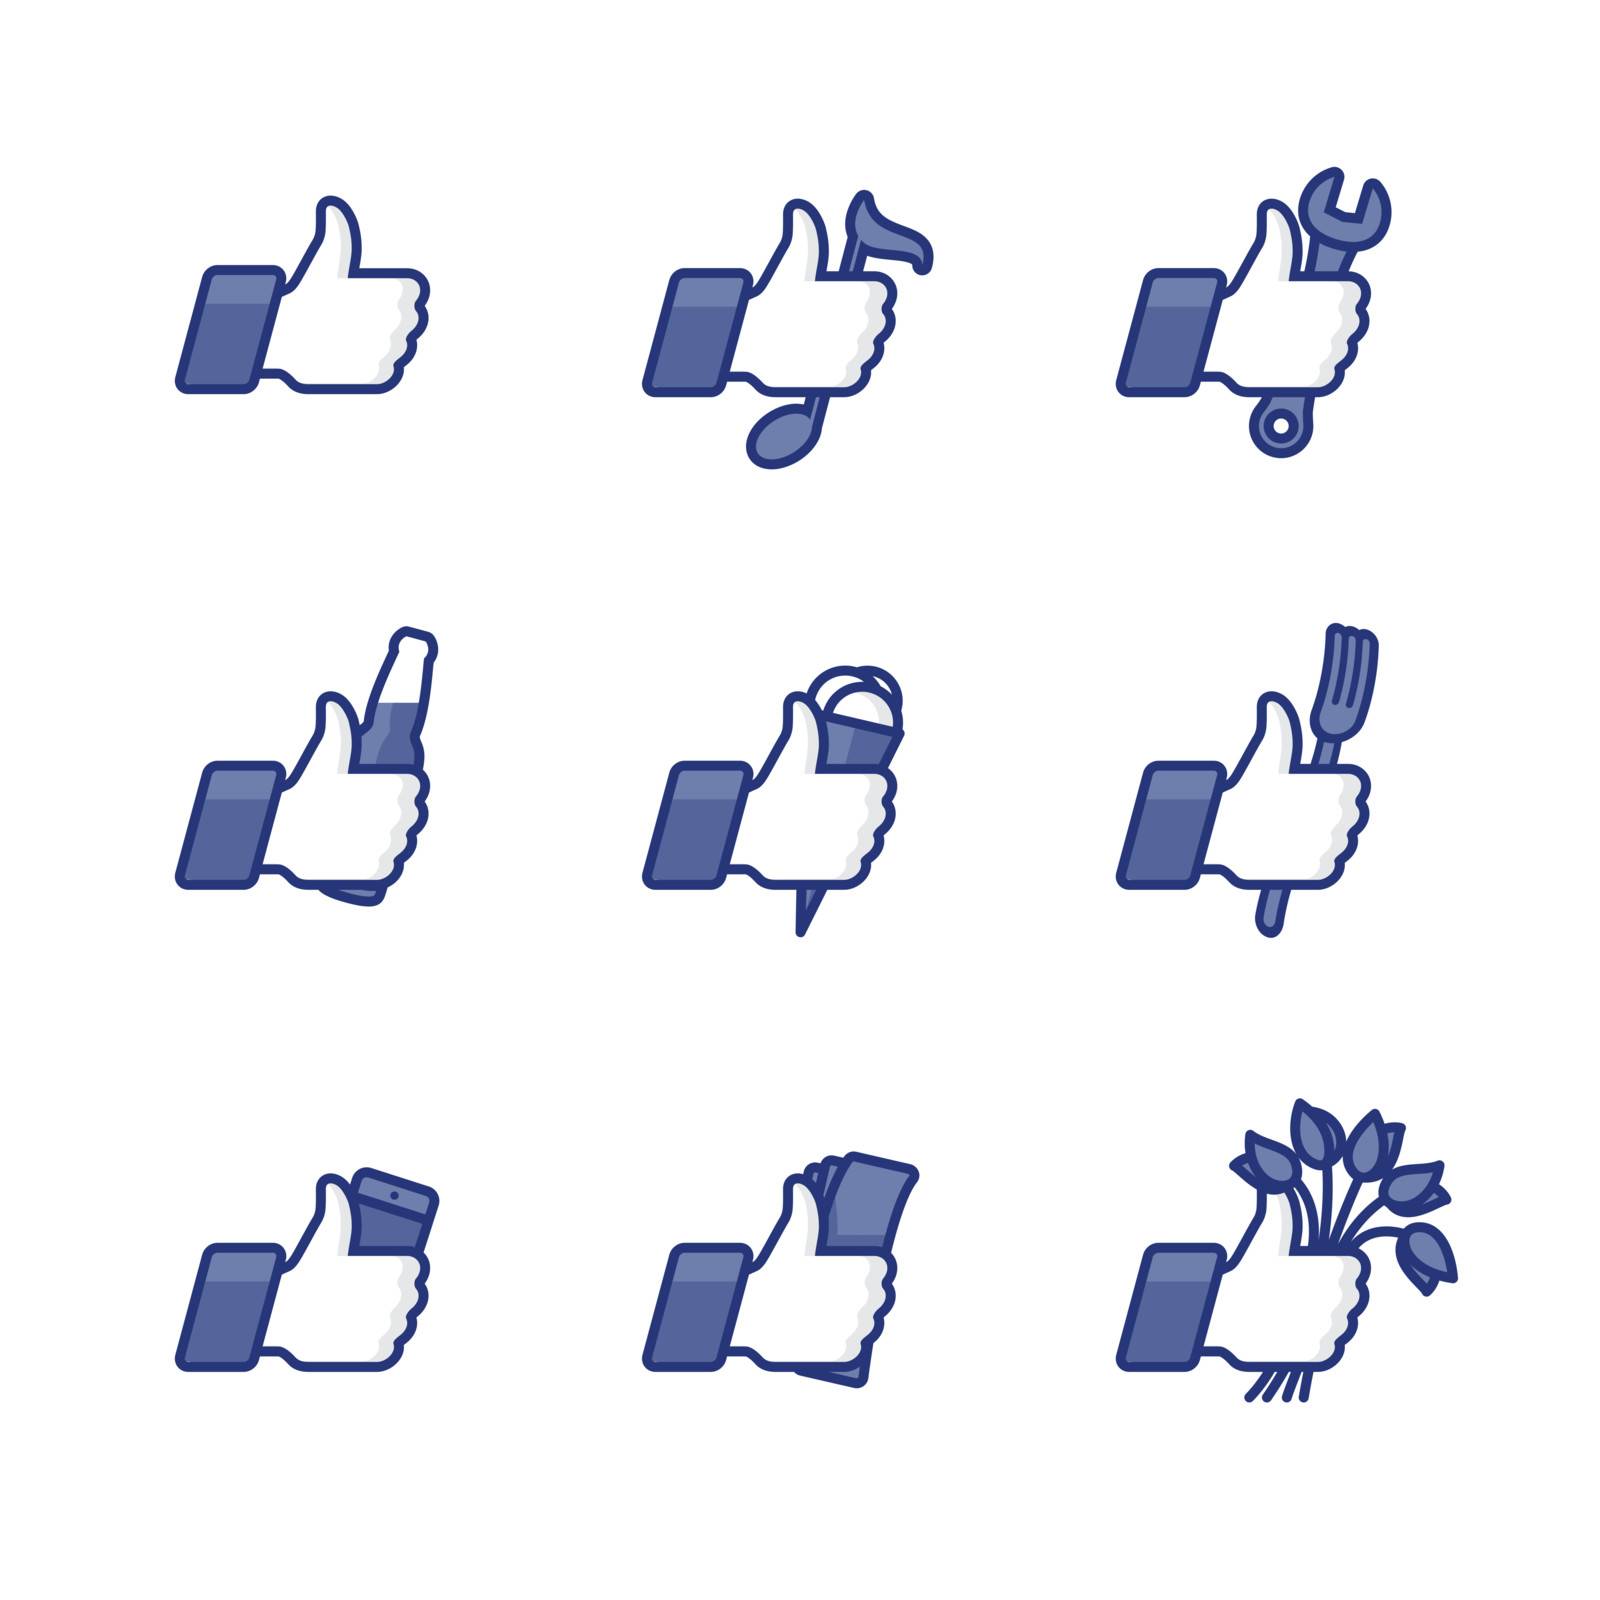 Thumbs Up icons set, vector Eps8 image by ikopylov